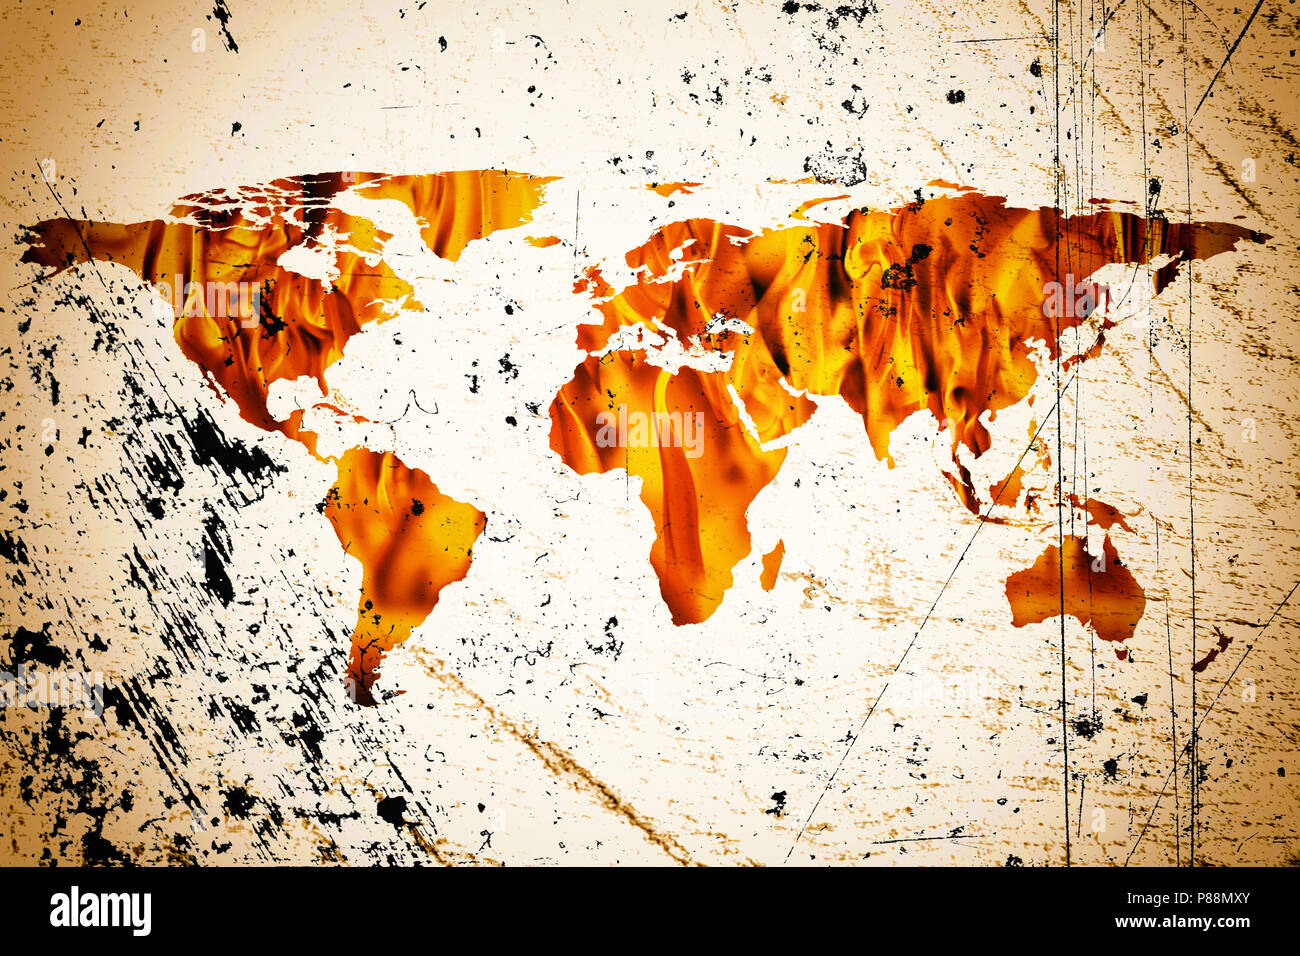 conceptual image of flat world map and fire flames. NASA flat world map image used to furnish this image. Stock Photo